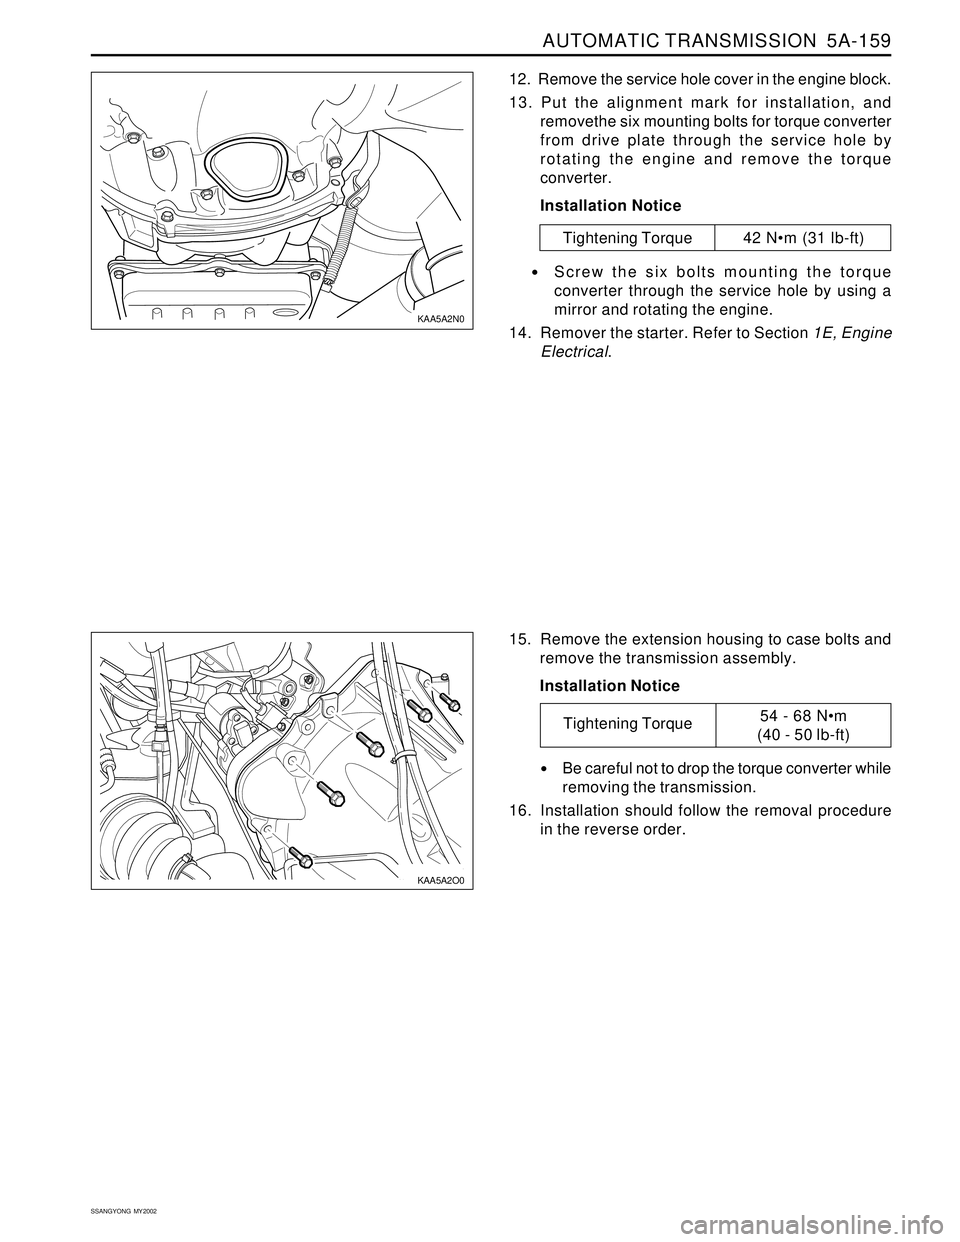 SSANGYONG KORANDO 1997  Service Repair Manual AUTOMATIC TRANSMISSION  5A-159
SSANGYONG  MY2002
12.  Remove the service hole cover in the engine block.
13. Put the alignment mark for installation, and
removethe six mounting bolts for torque conver